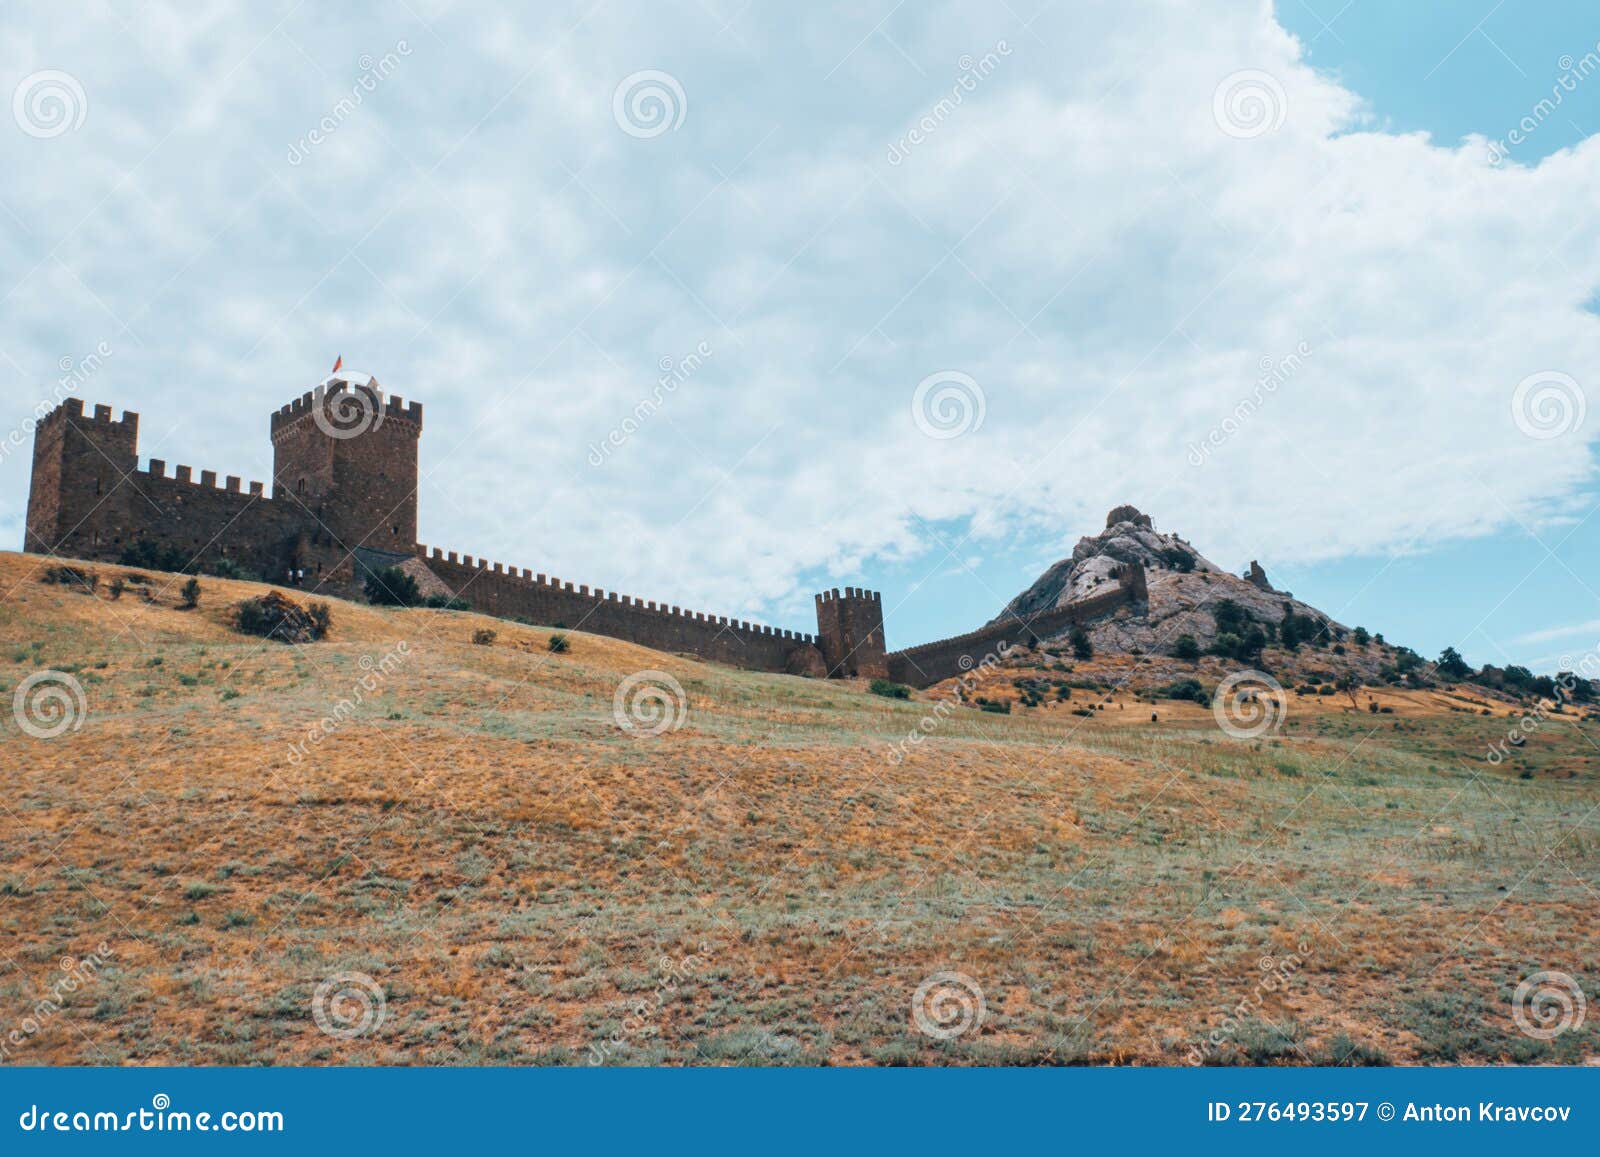 A Fortress with Towers on a Rock. Stock Image - Image of site ...